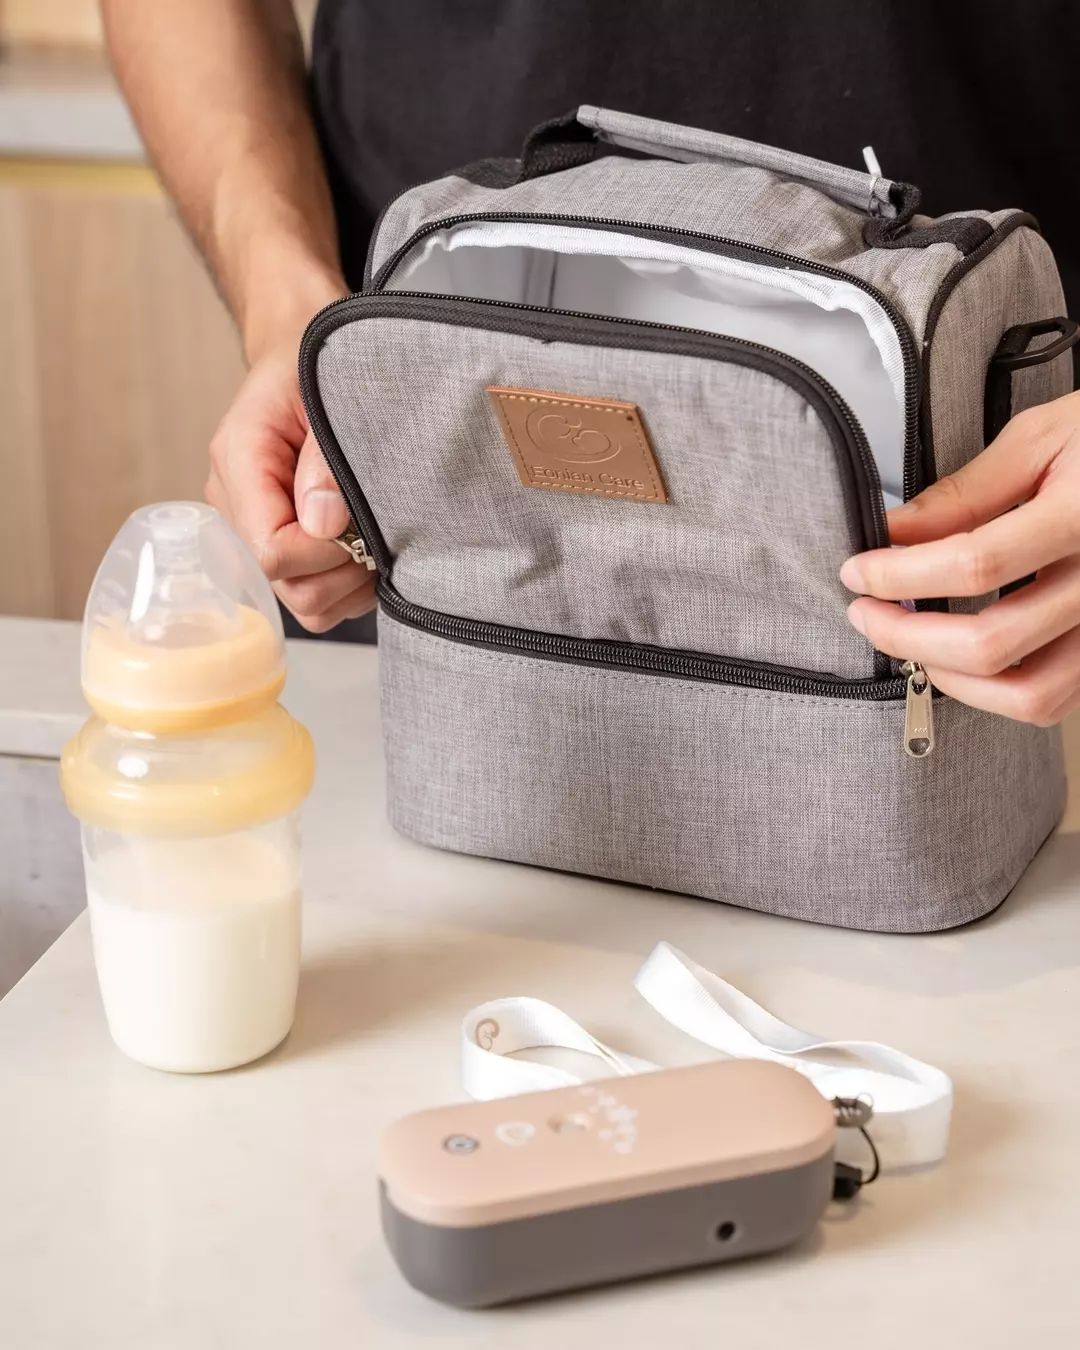 The Best Accessories That Go with Your Electric Breast Pump